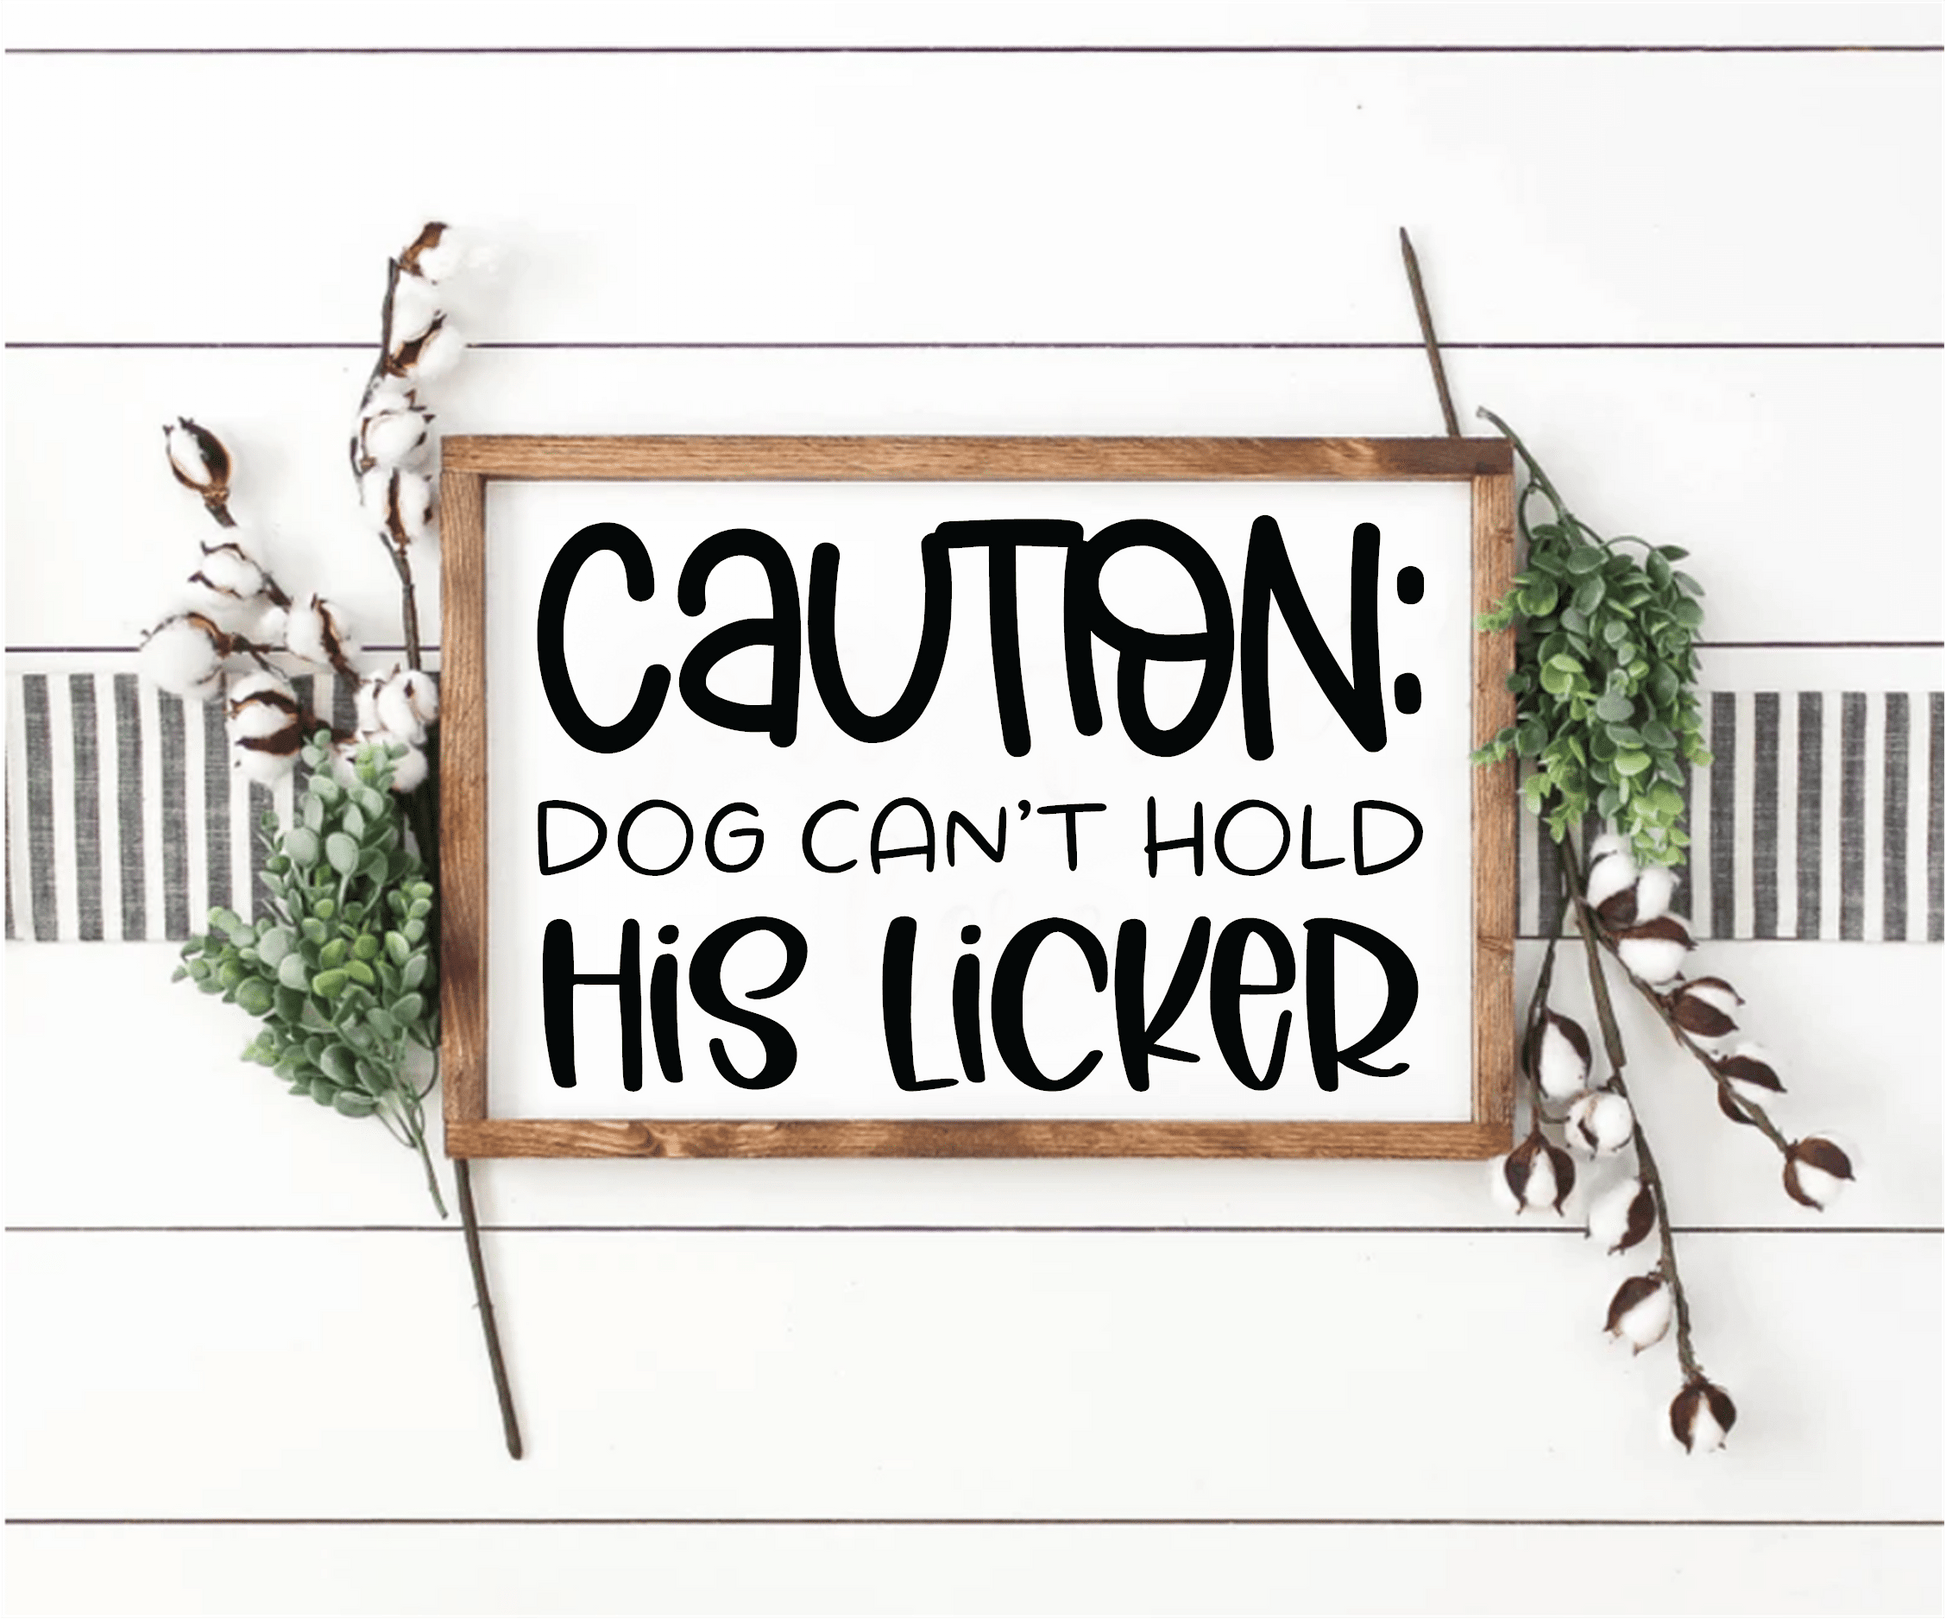 Purple LadyBug Decor Sign Caution Dog Can't Hold His Licker Framed Sign